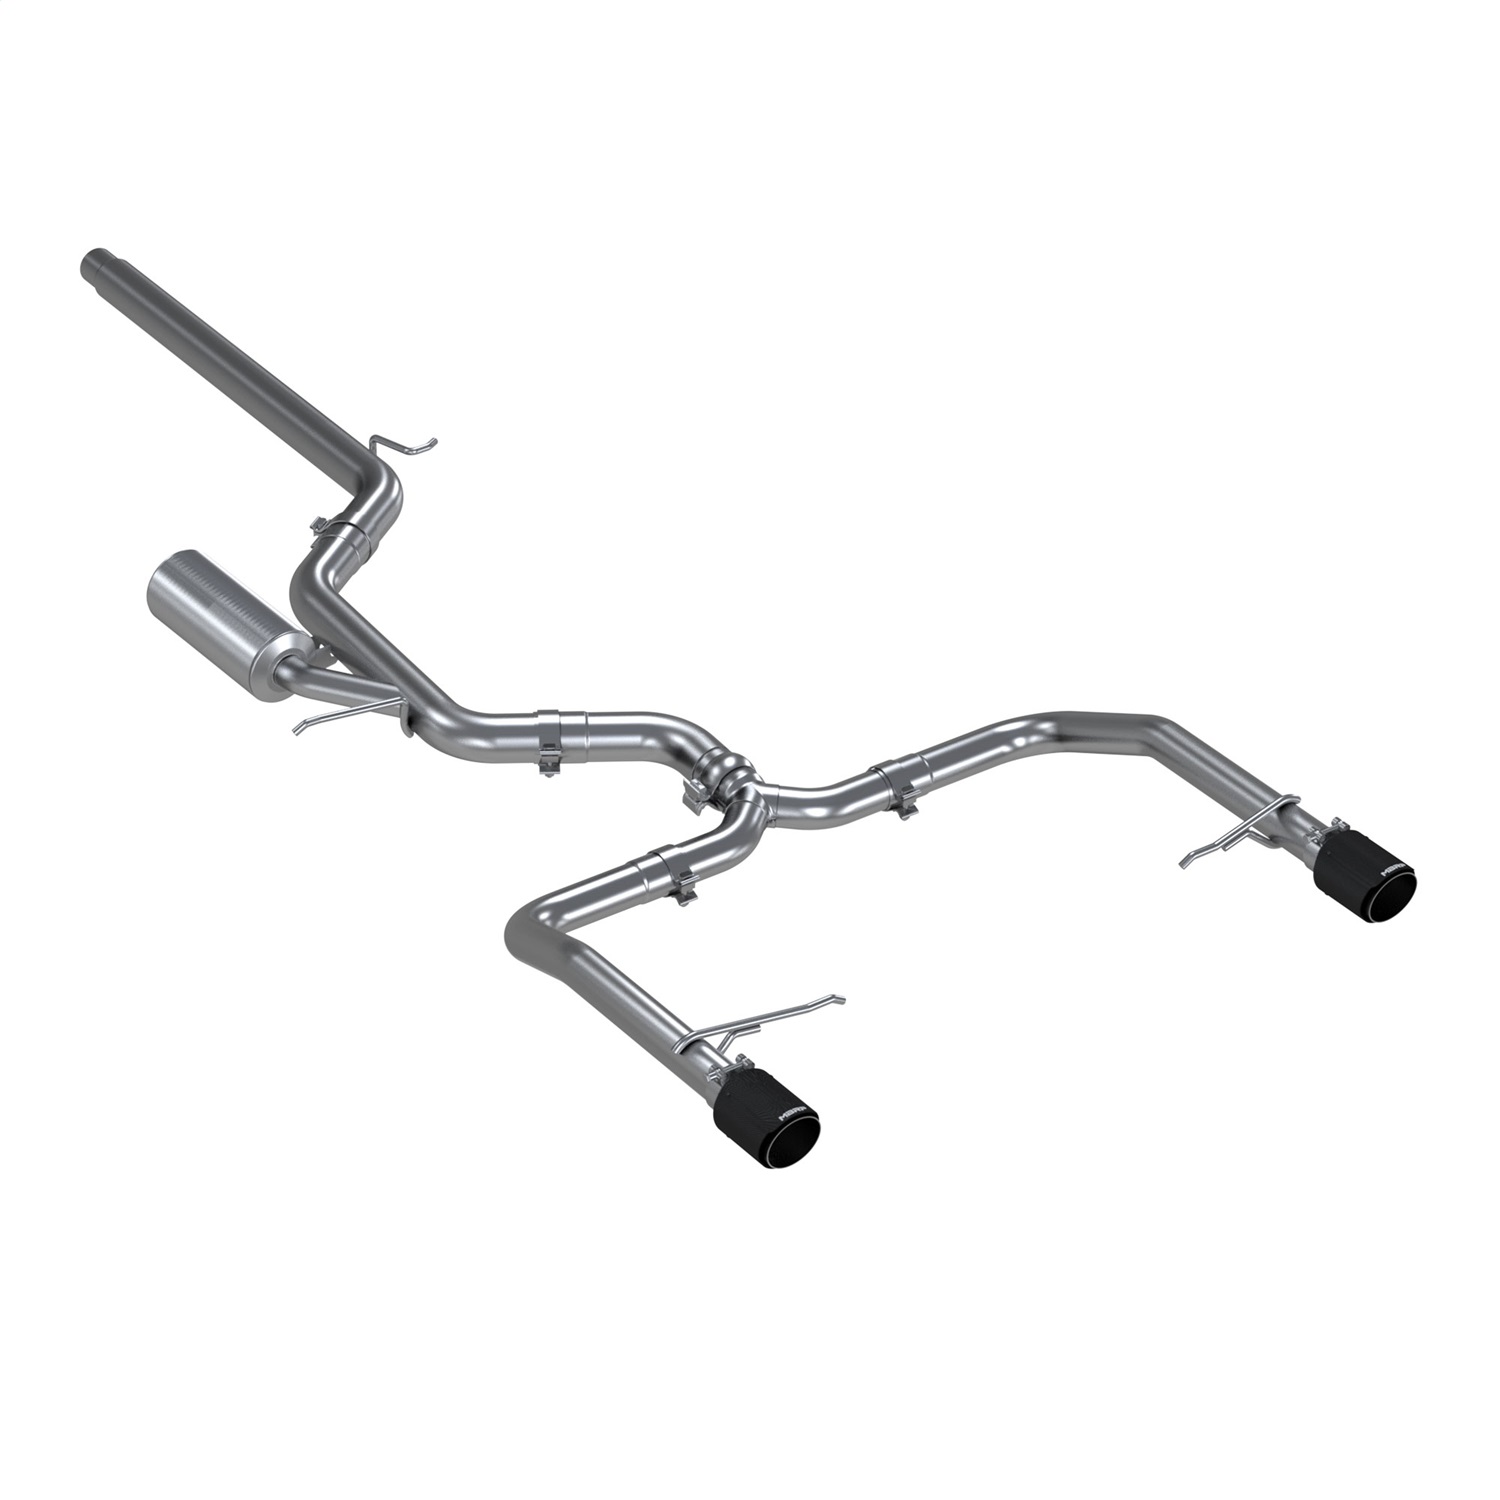 MBRP Exhaust S46083CF Armor Pro Cat Back Exhaust System Fits 19-21 Jetta